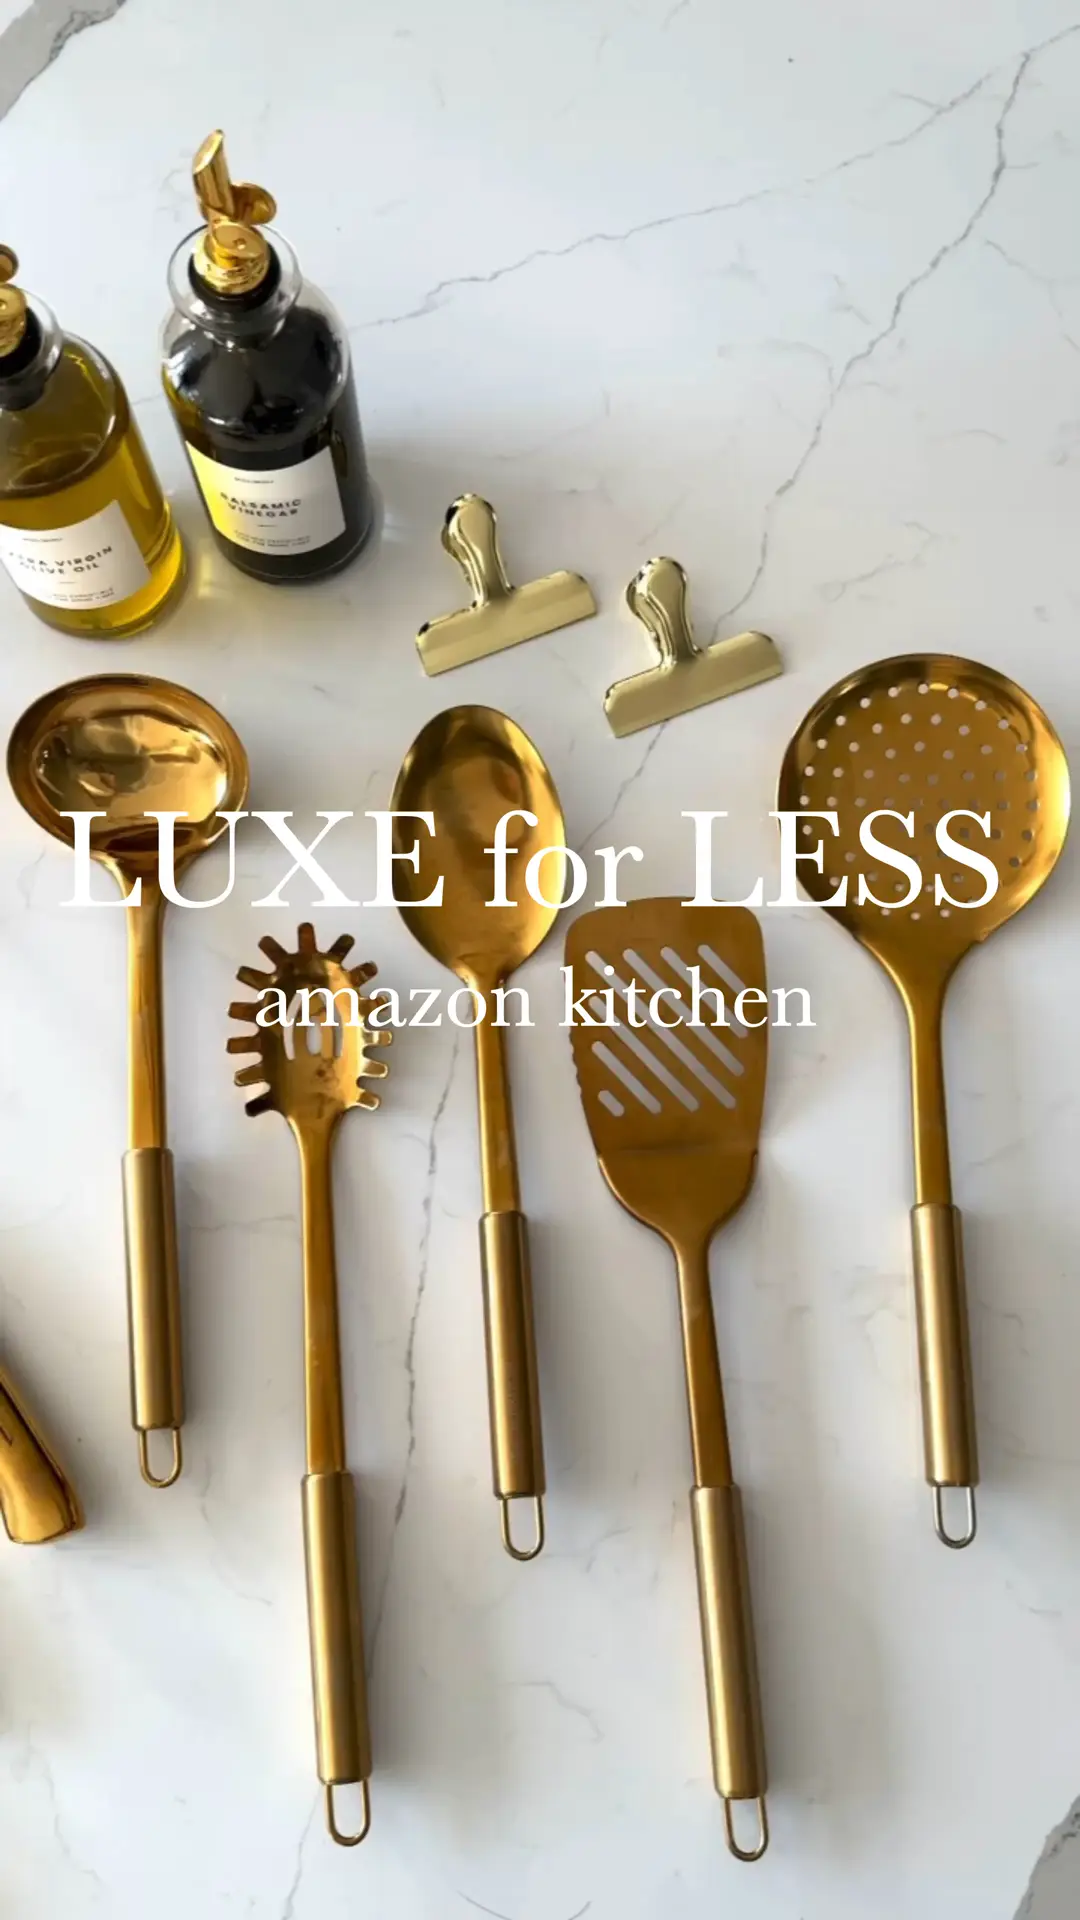 White & Gold Kitchen Tools and Gadgets - Luxe 8PC Cooking Tools